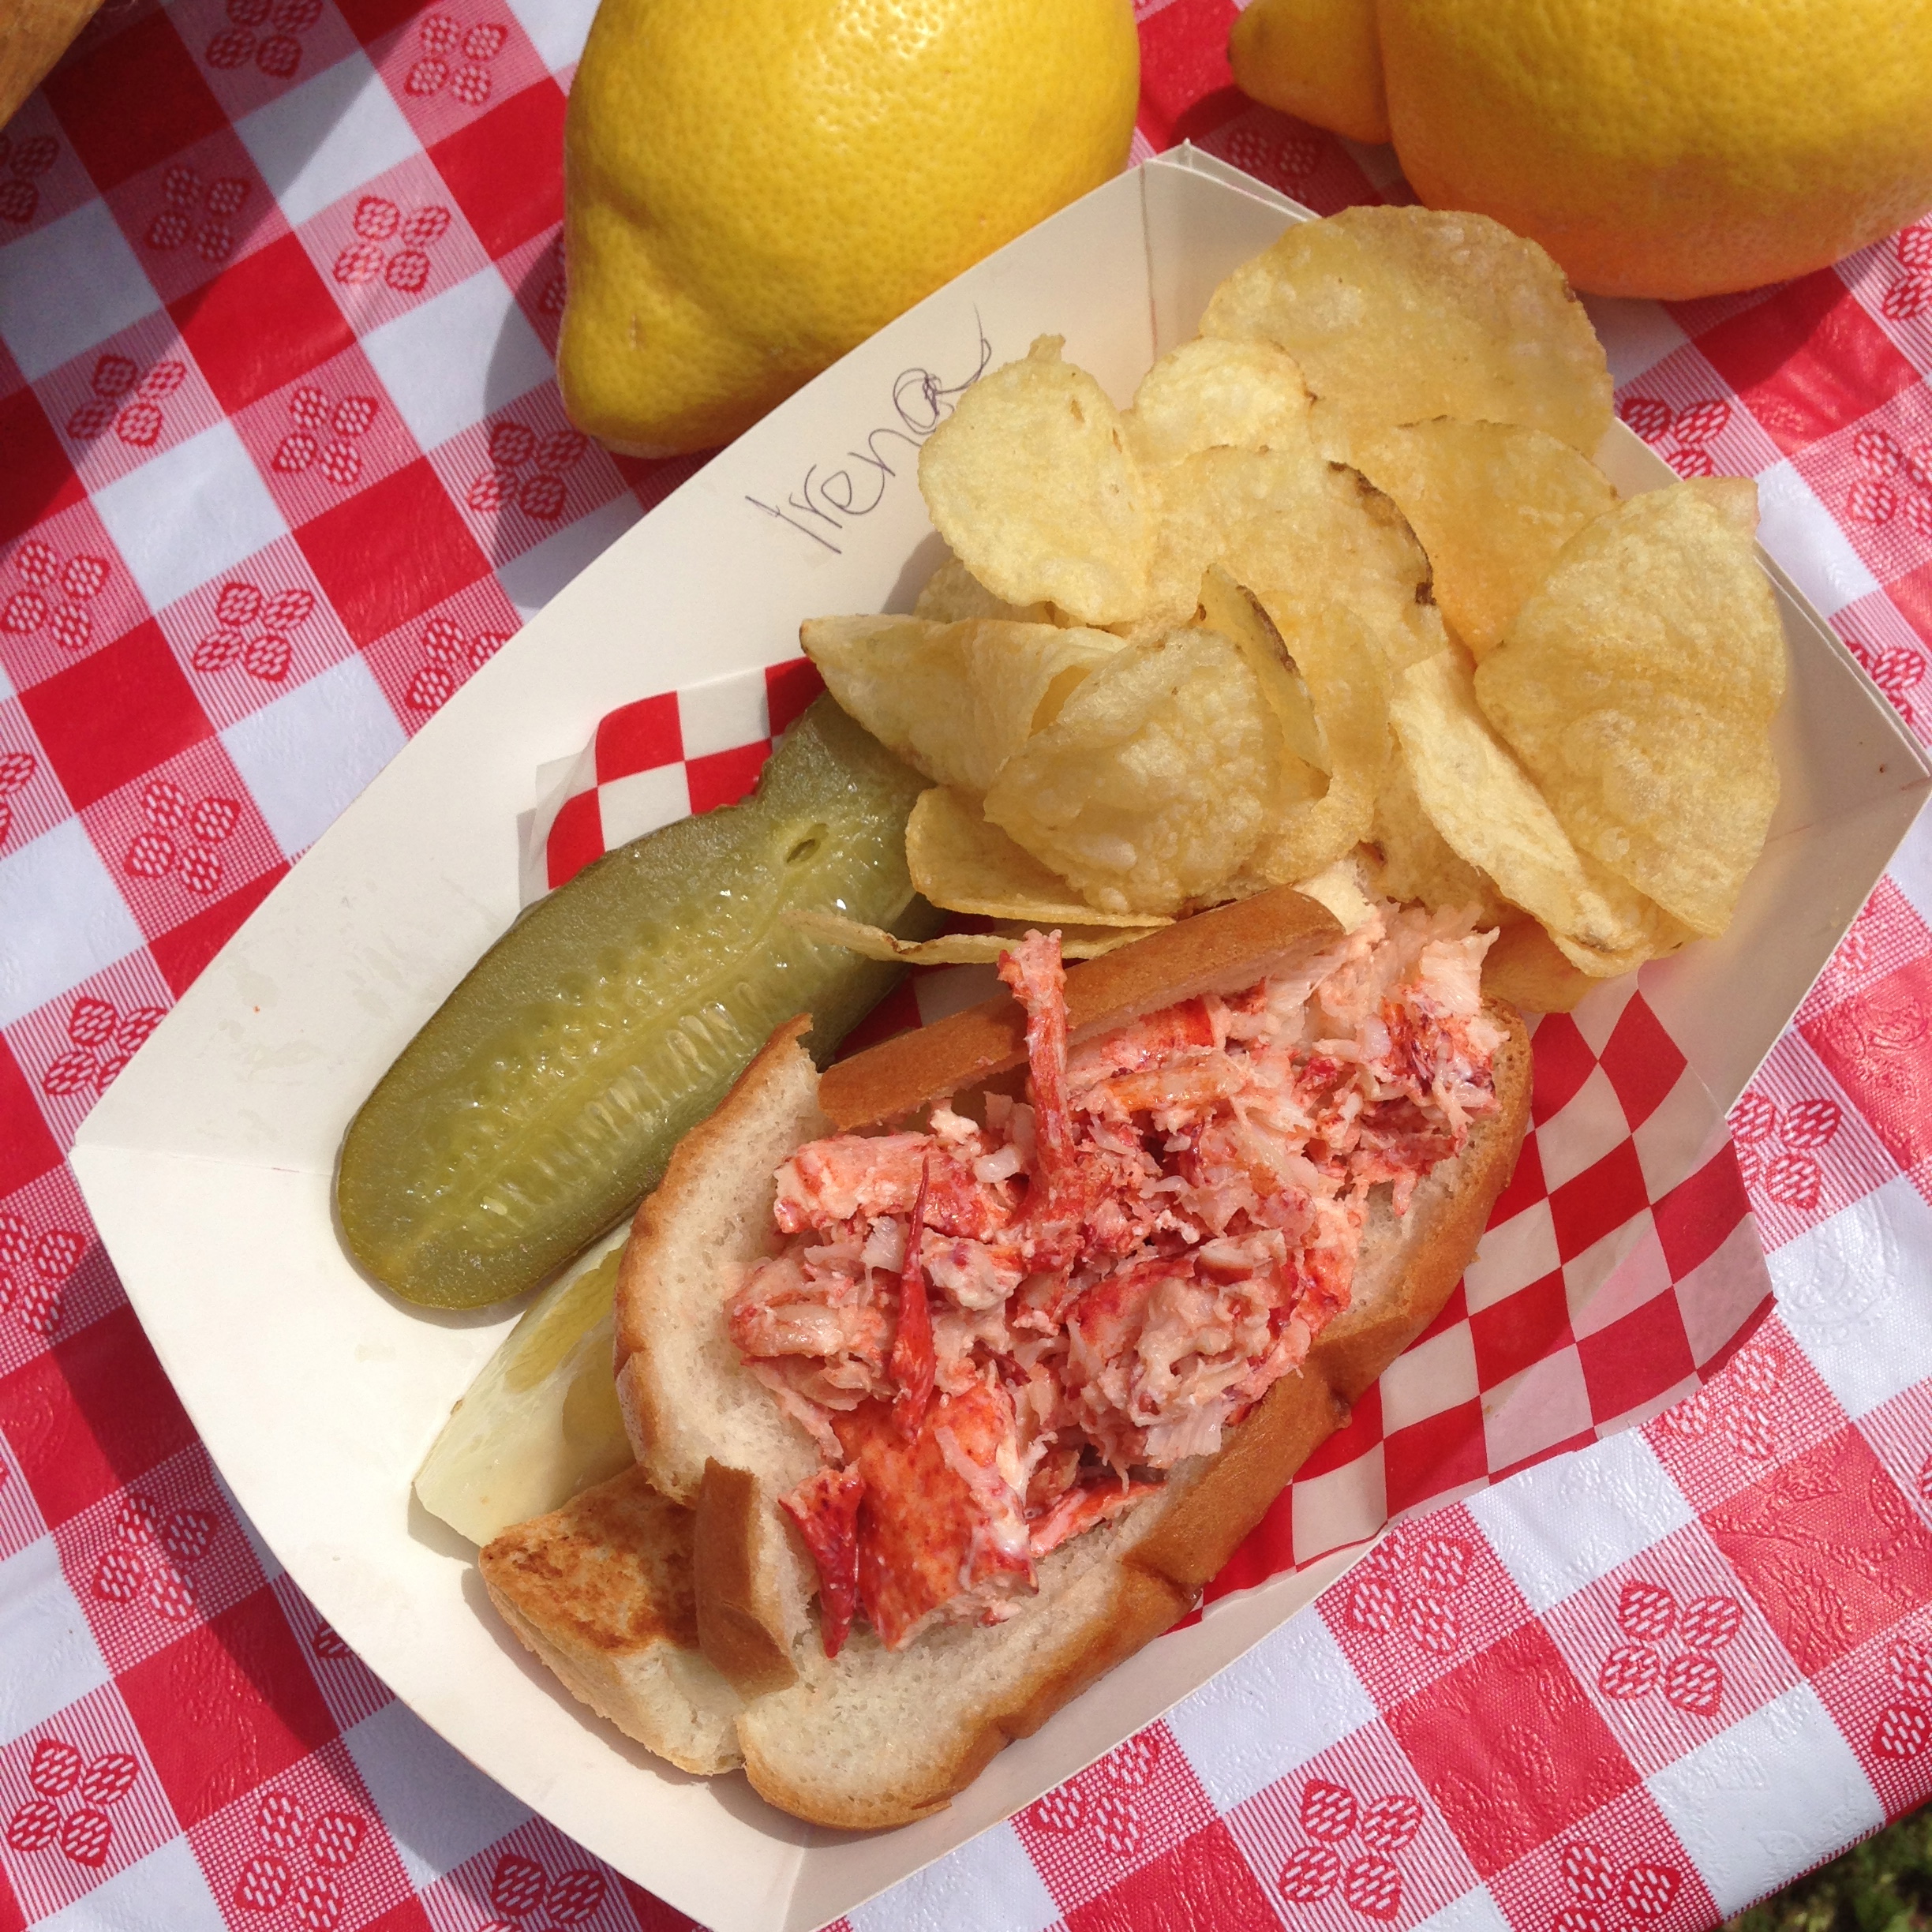 One of the best lobster rolls I've had recently.